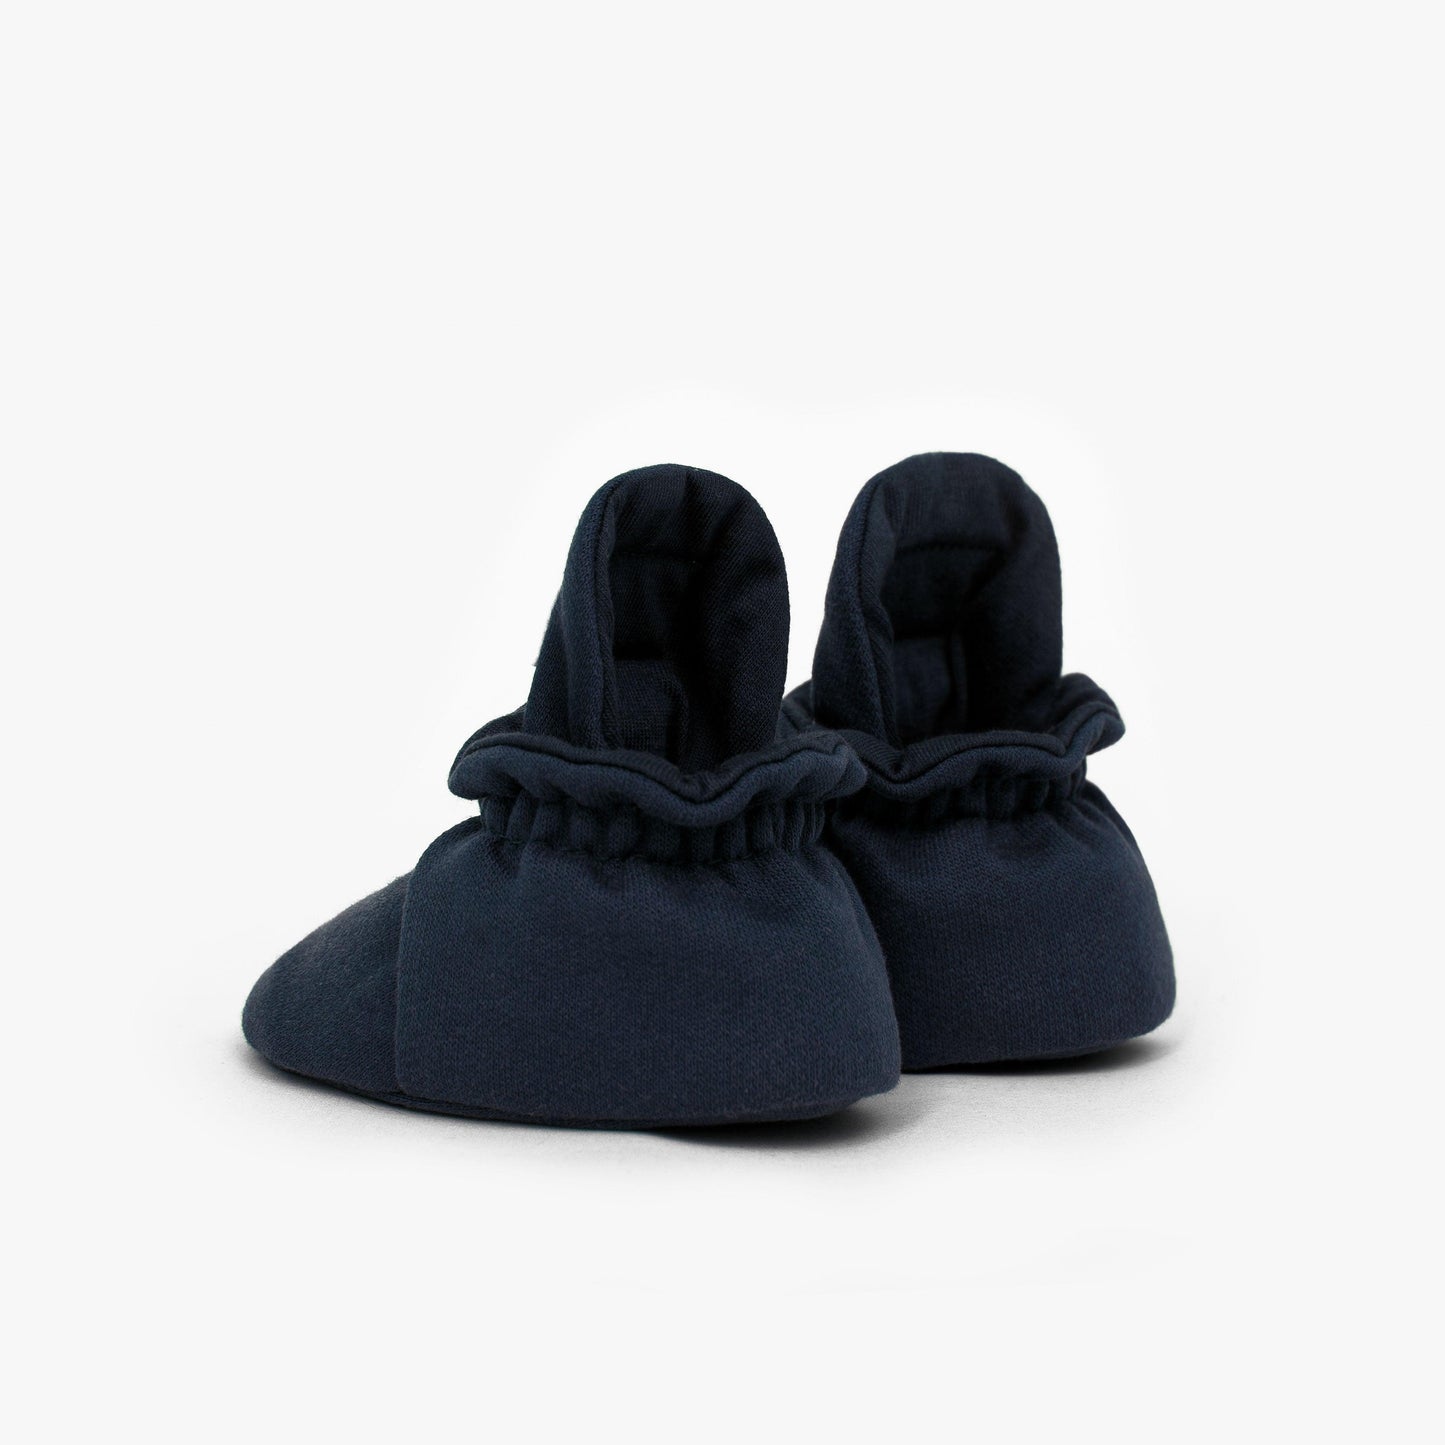 Cotton Booties 'Classic'- Navy - The Little One • Family.Concept.Store. 